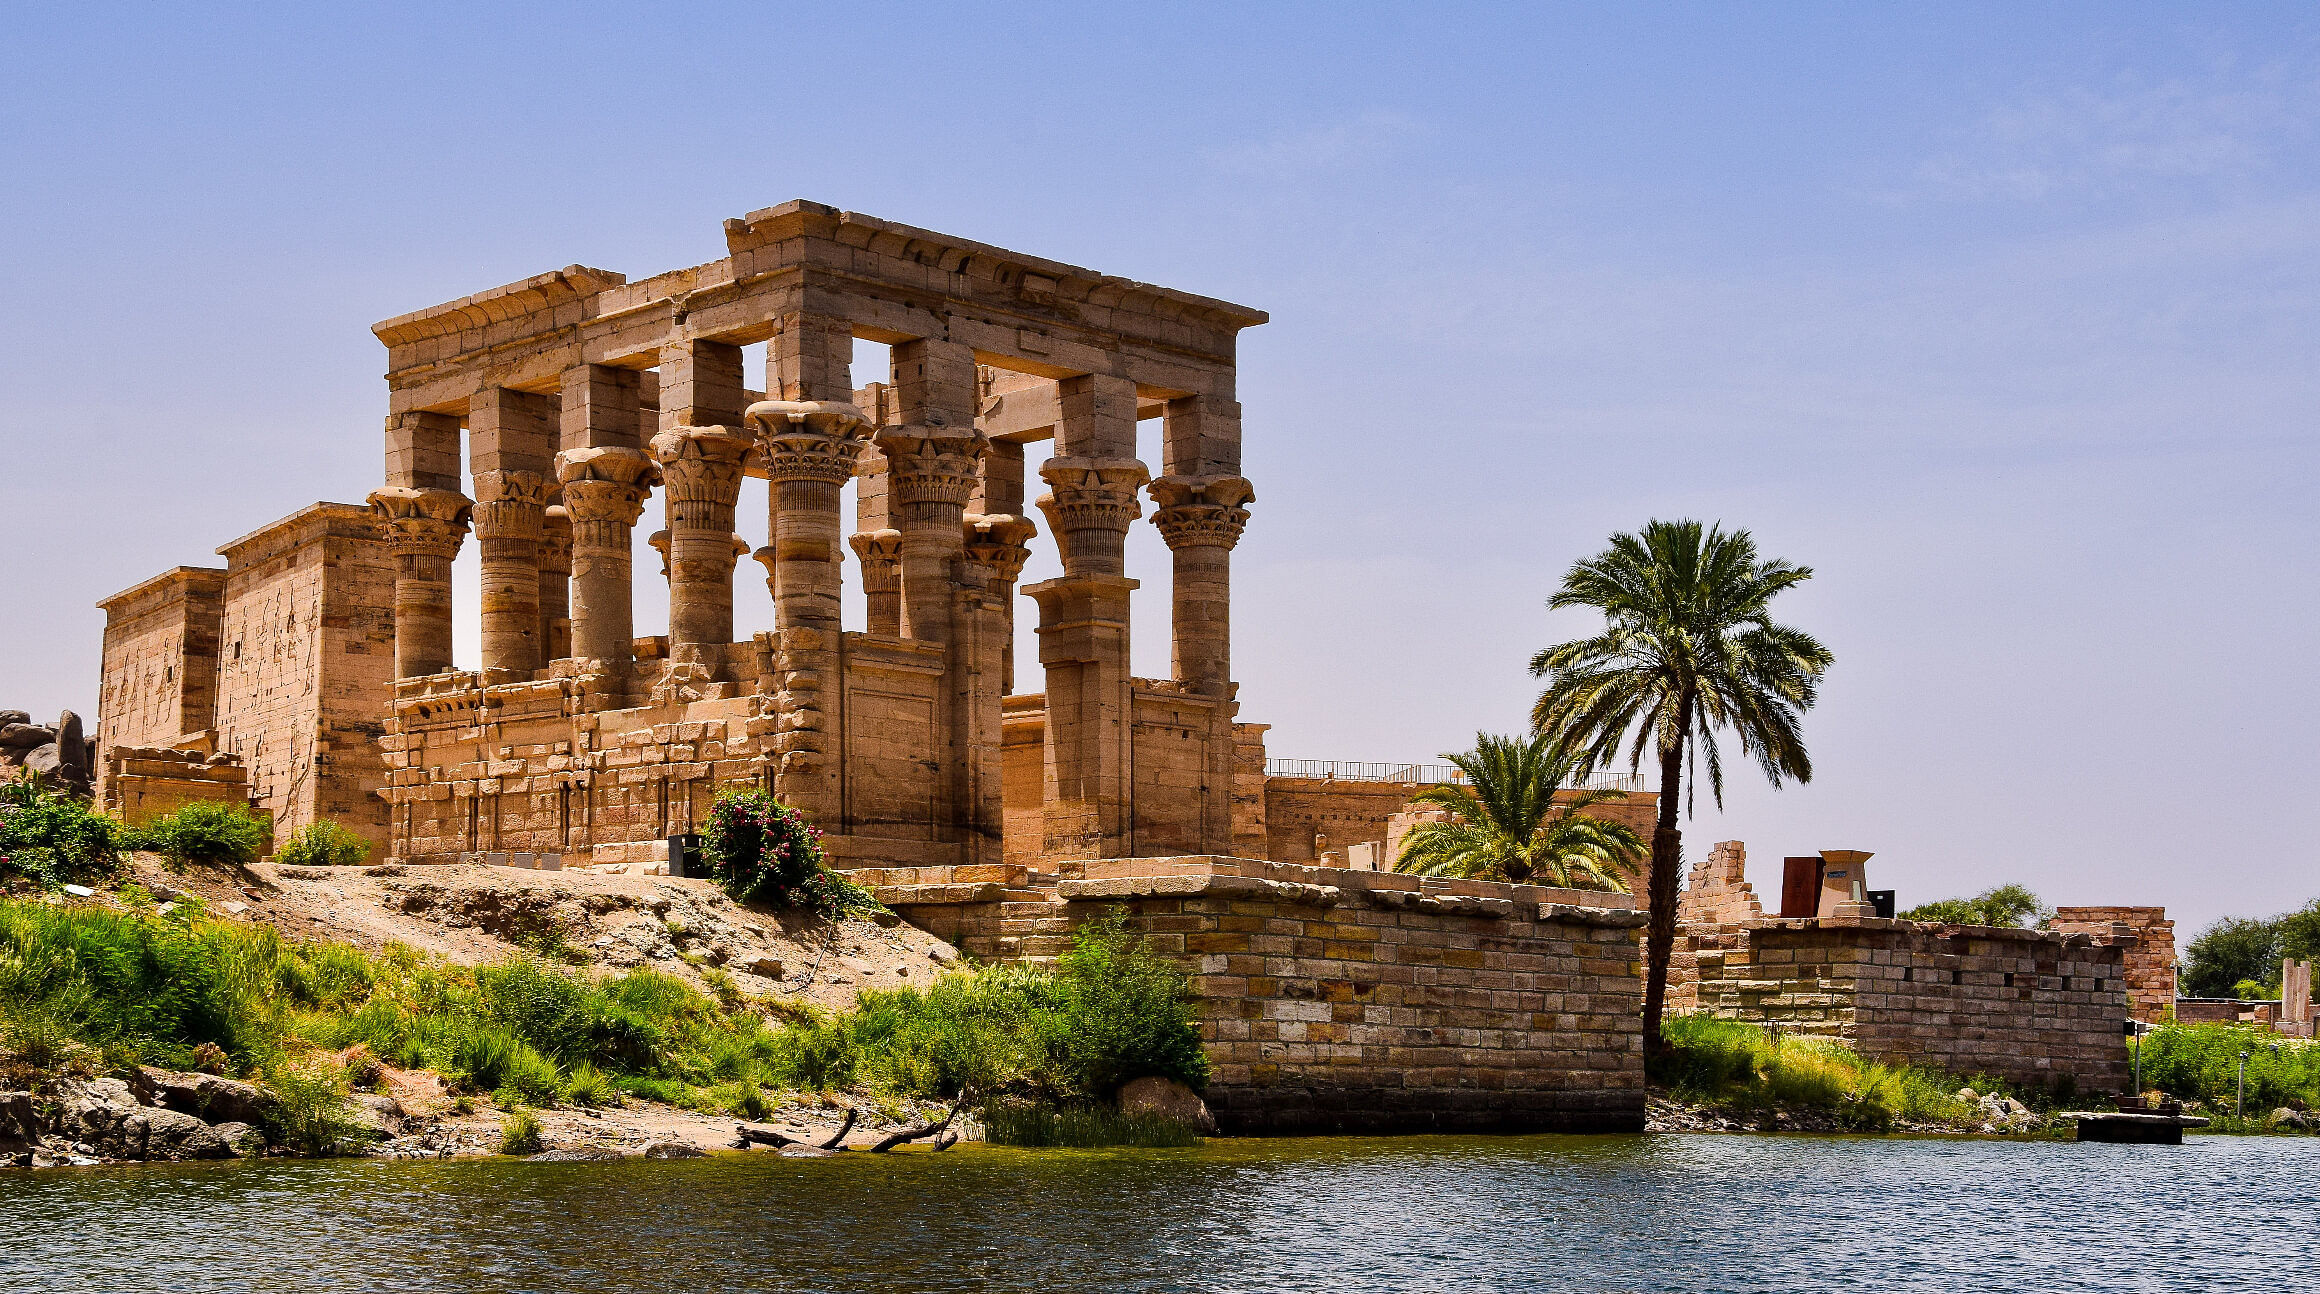 Ancient temple on the Nile River